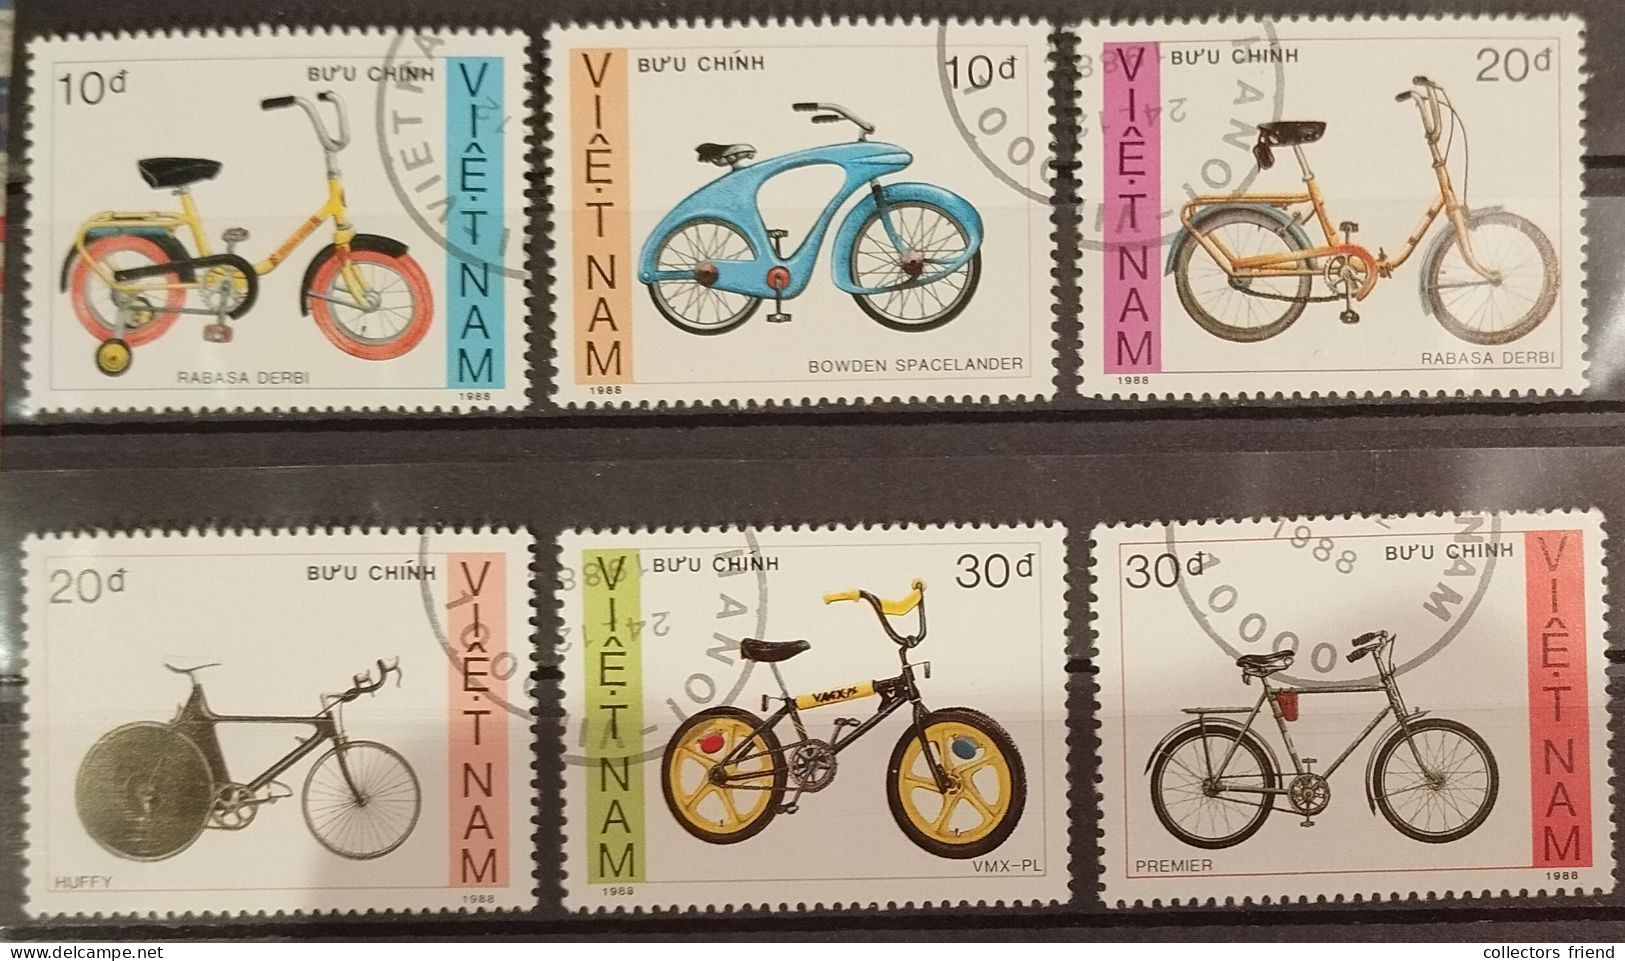 VIETNAM - 1988 - CYCLING BICYCLE - 5 Stamps -  Used - Vélo